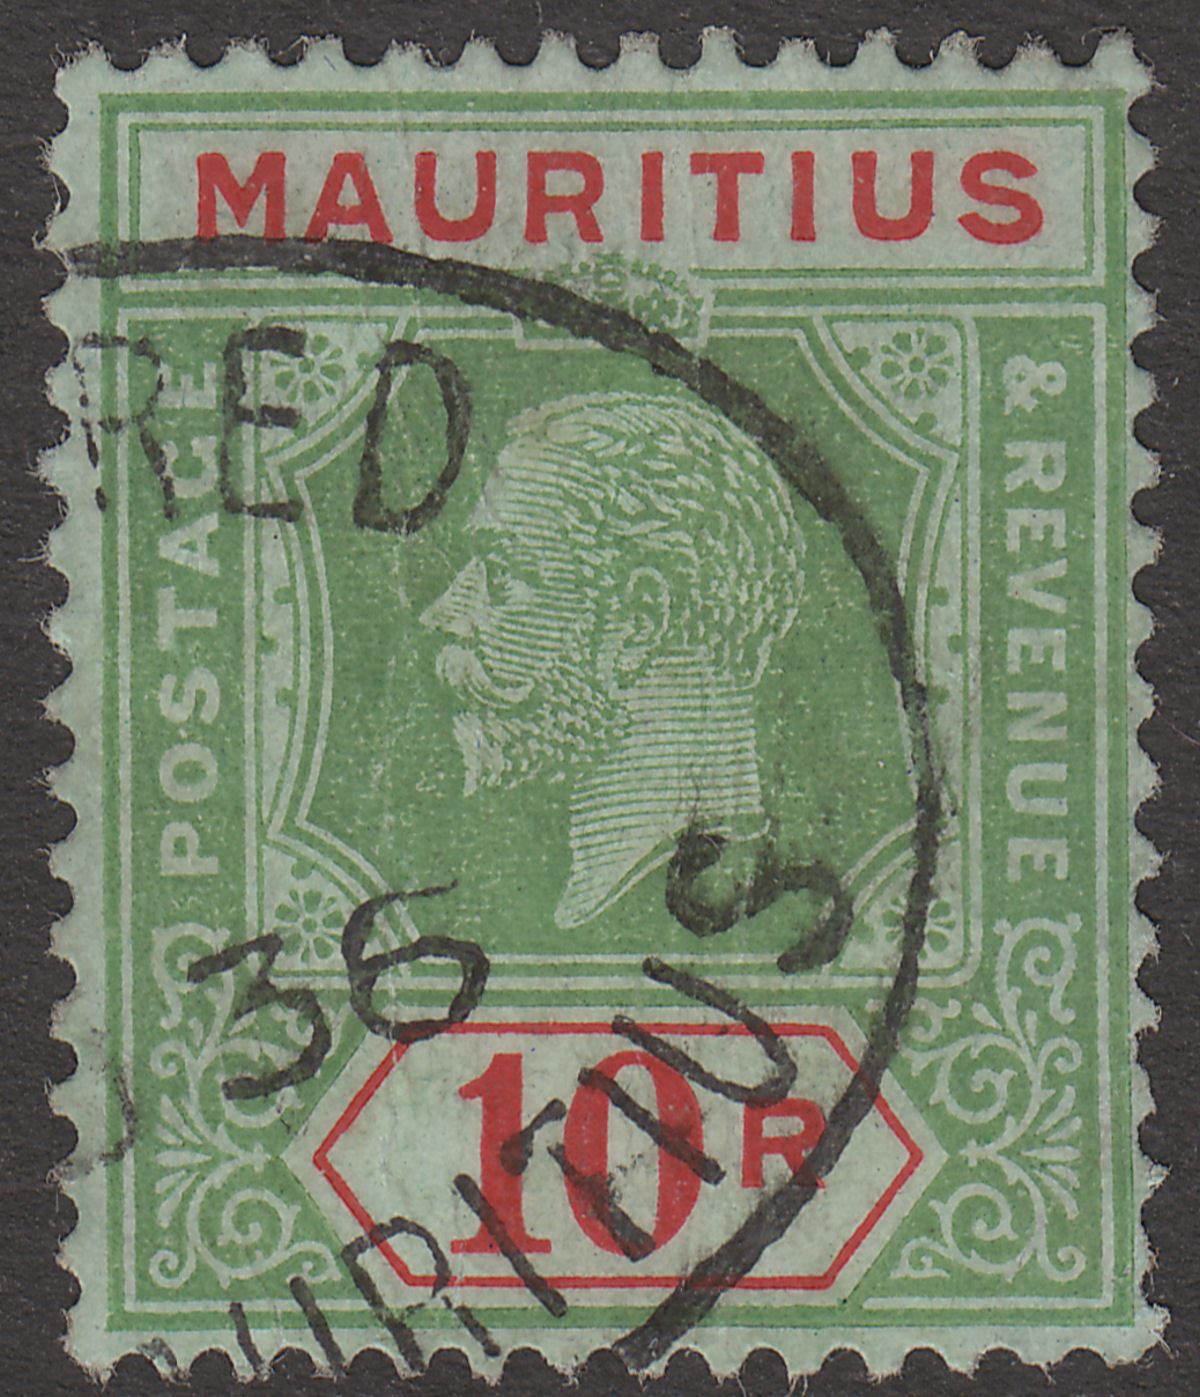 Mauritius 1921 KGV 10r Green and Red on Emerald Used SG204d cat £200 faults